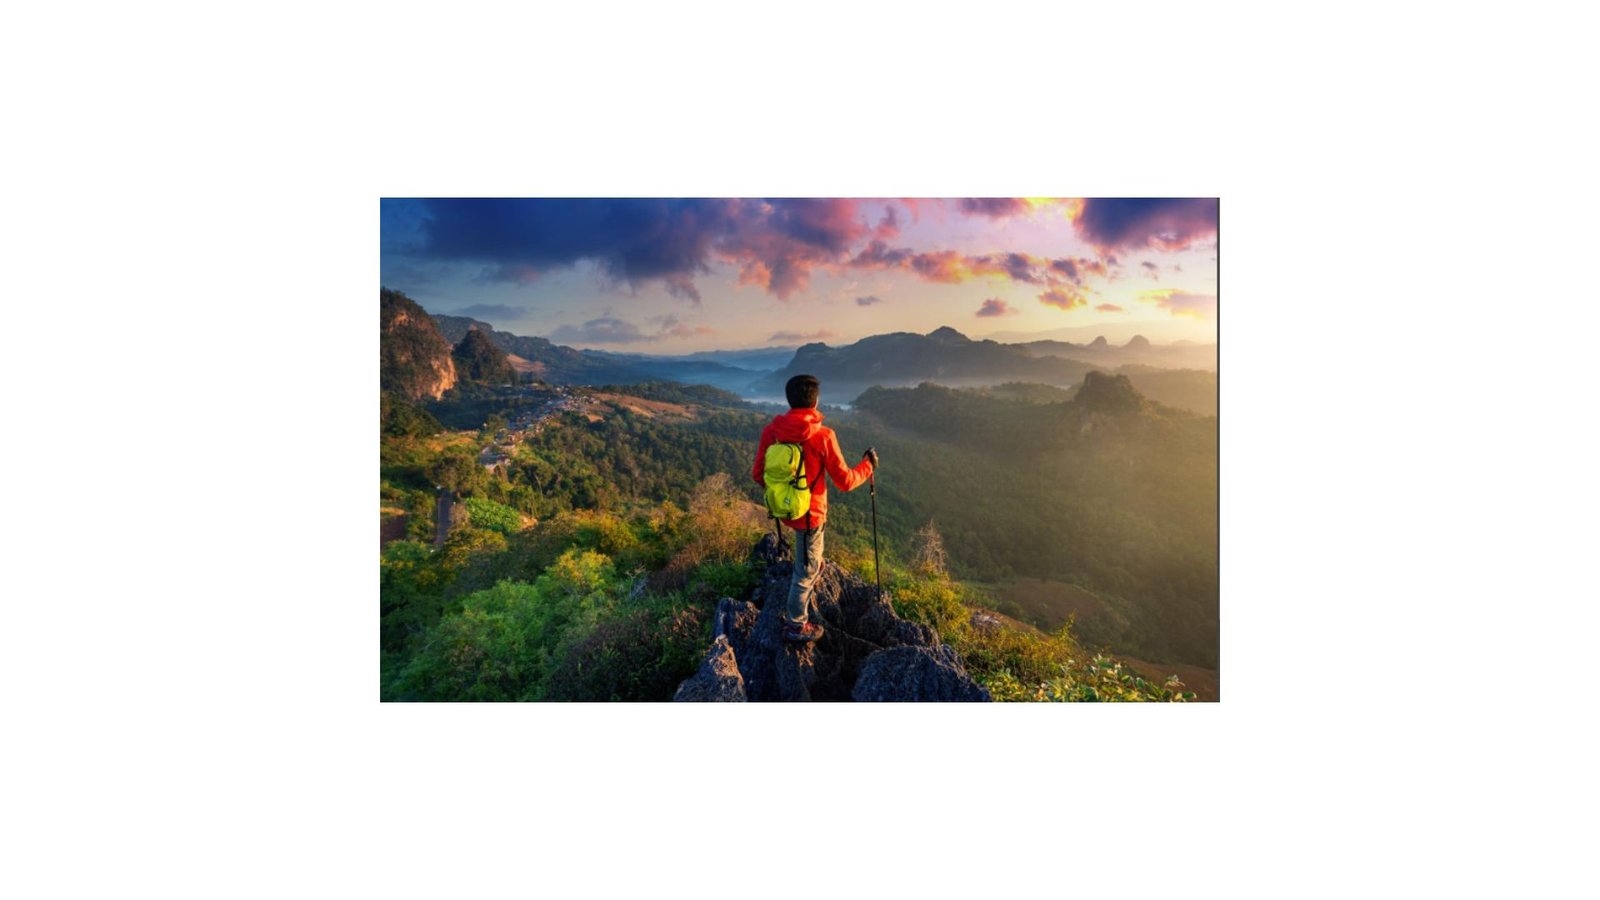 An image of a traveler standing on a cliff overlooking a vast landscape of mountains, forests, and a winding river below, evoking a sense of adventure and exploration